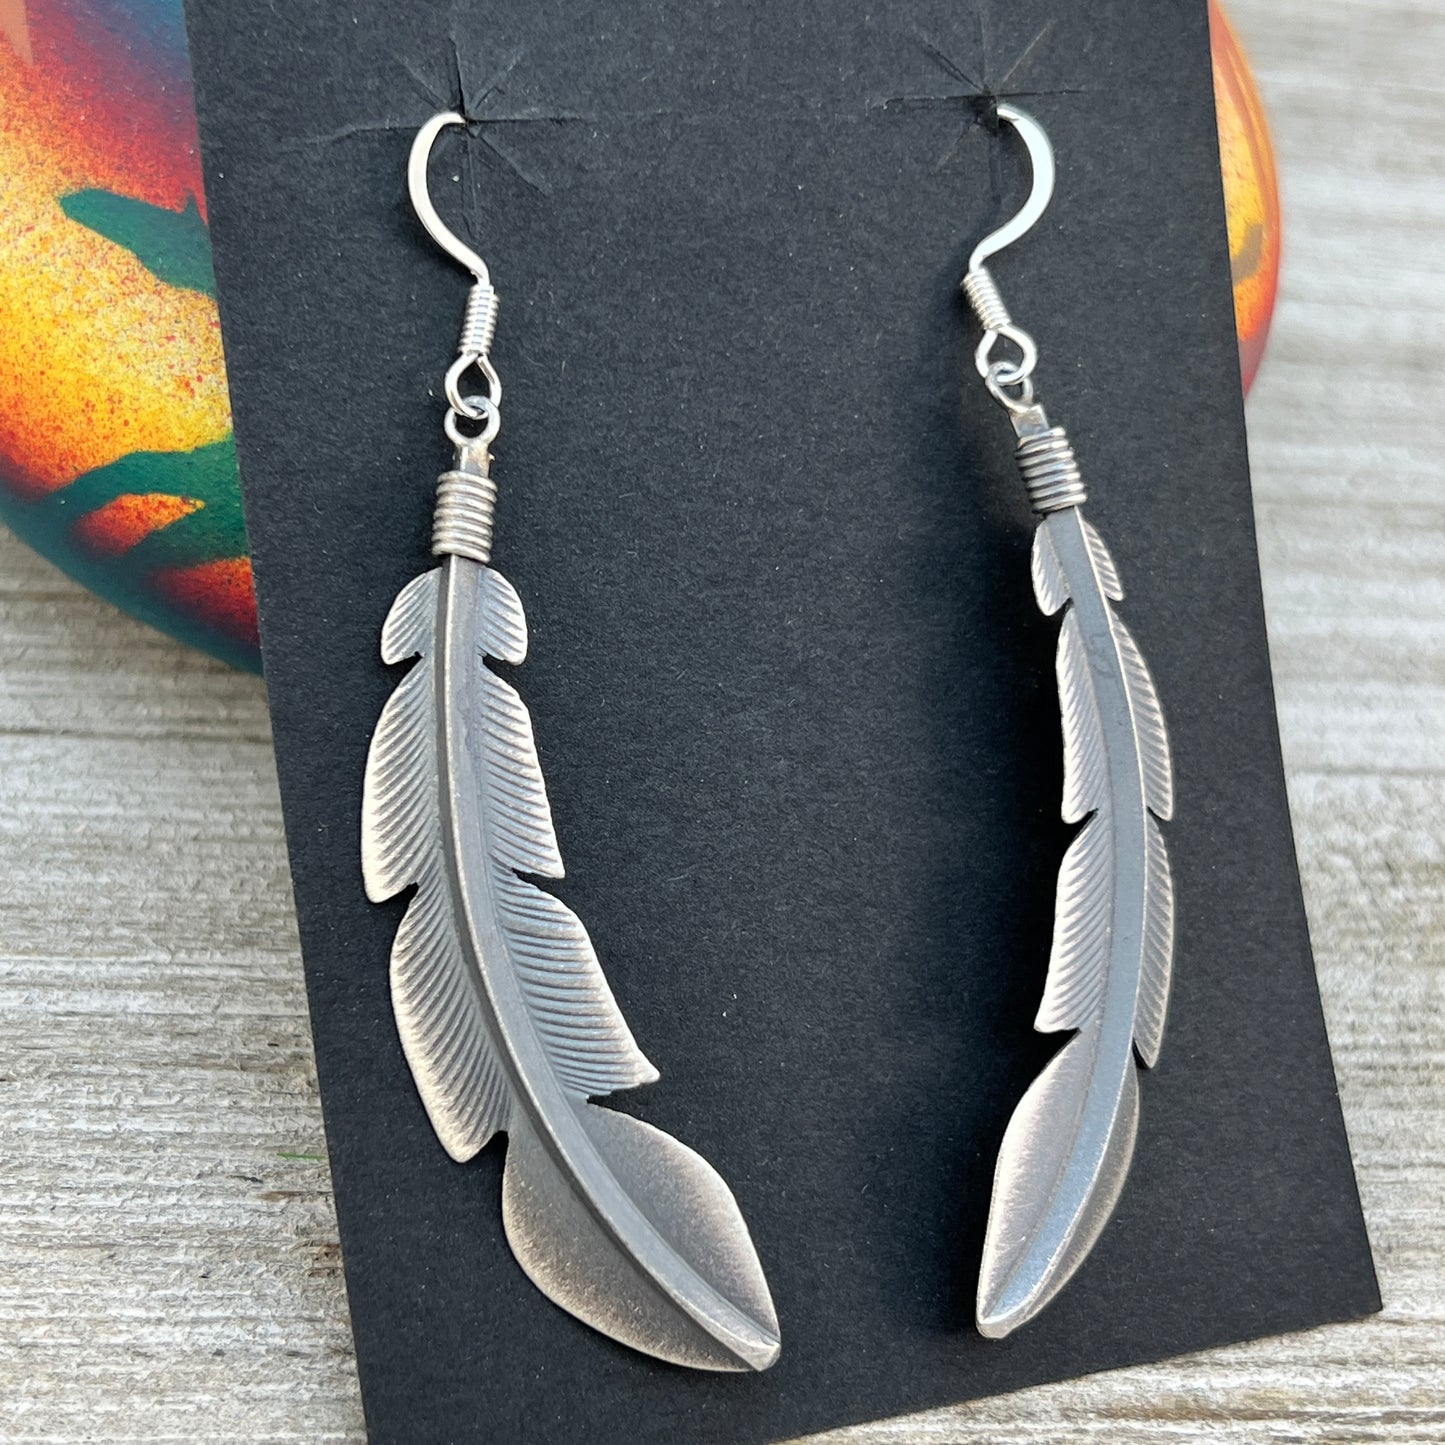 Handmade sterling silver Feather earrings, Navajo handmade by Billy Long, signed